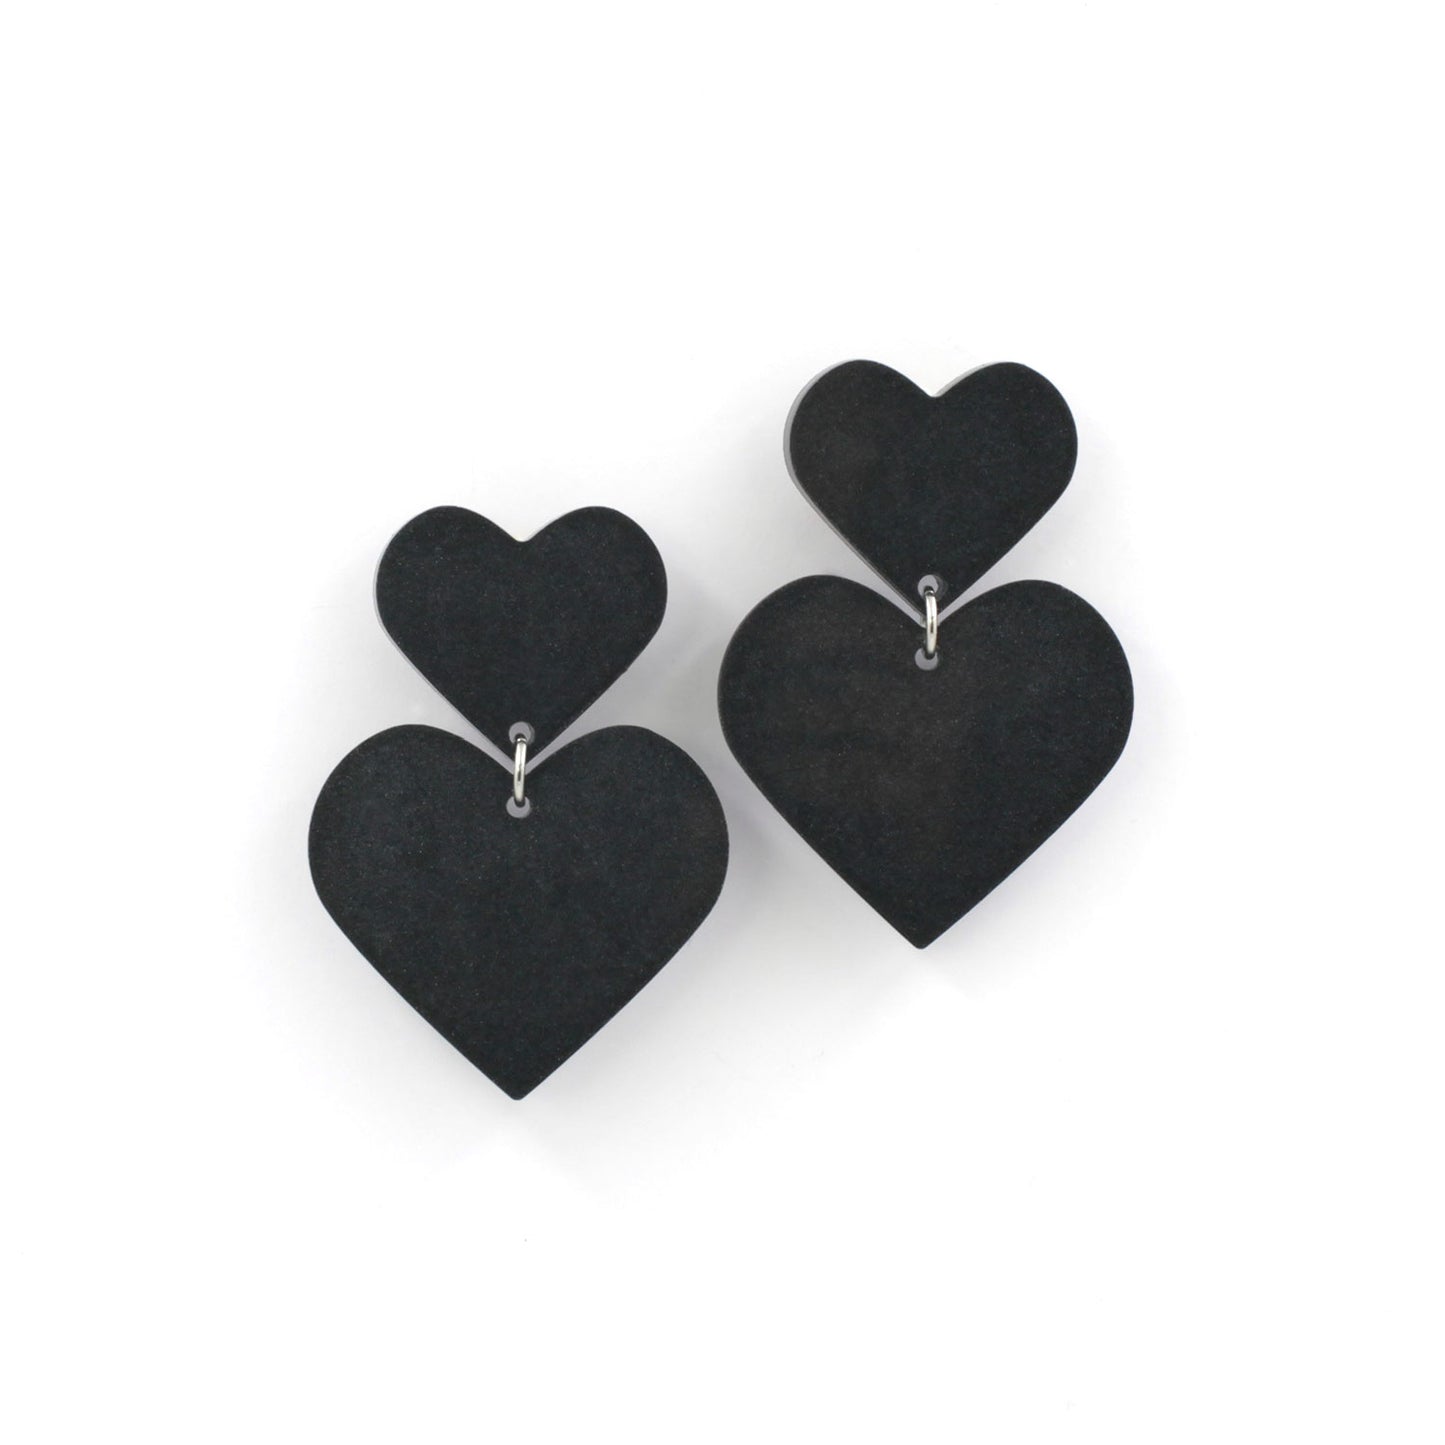 black hearts earrings on a white background.